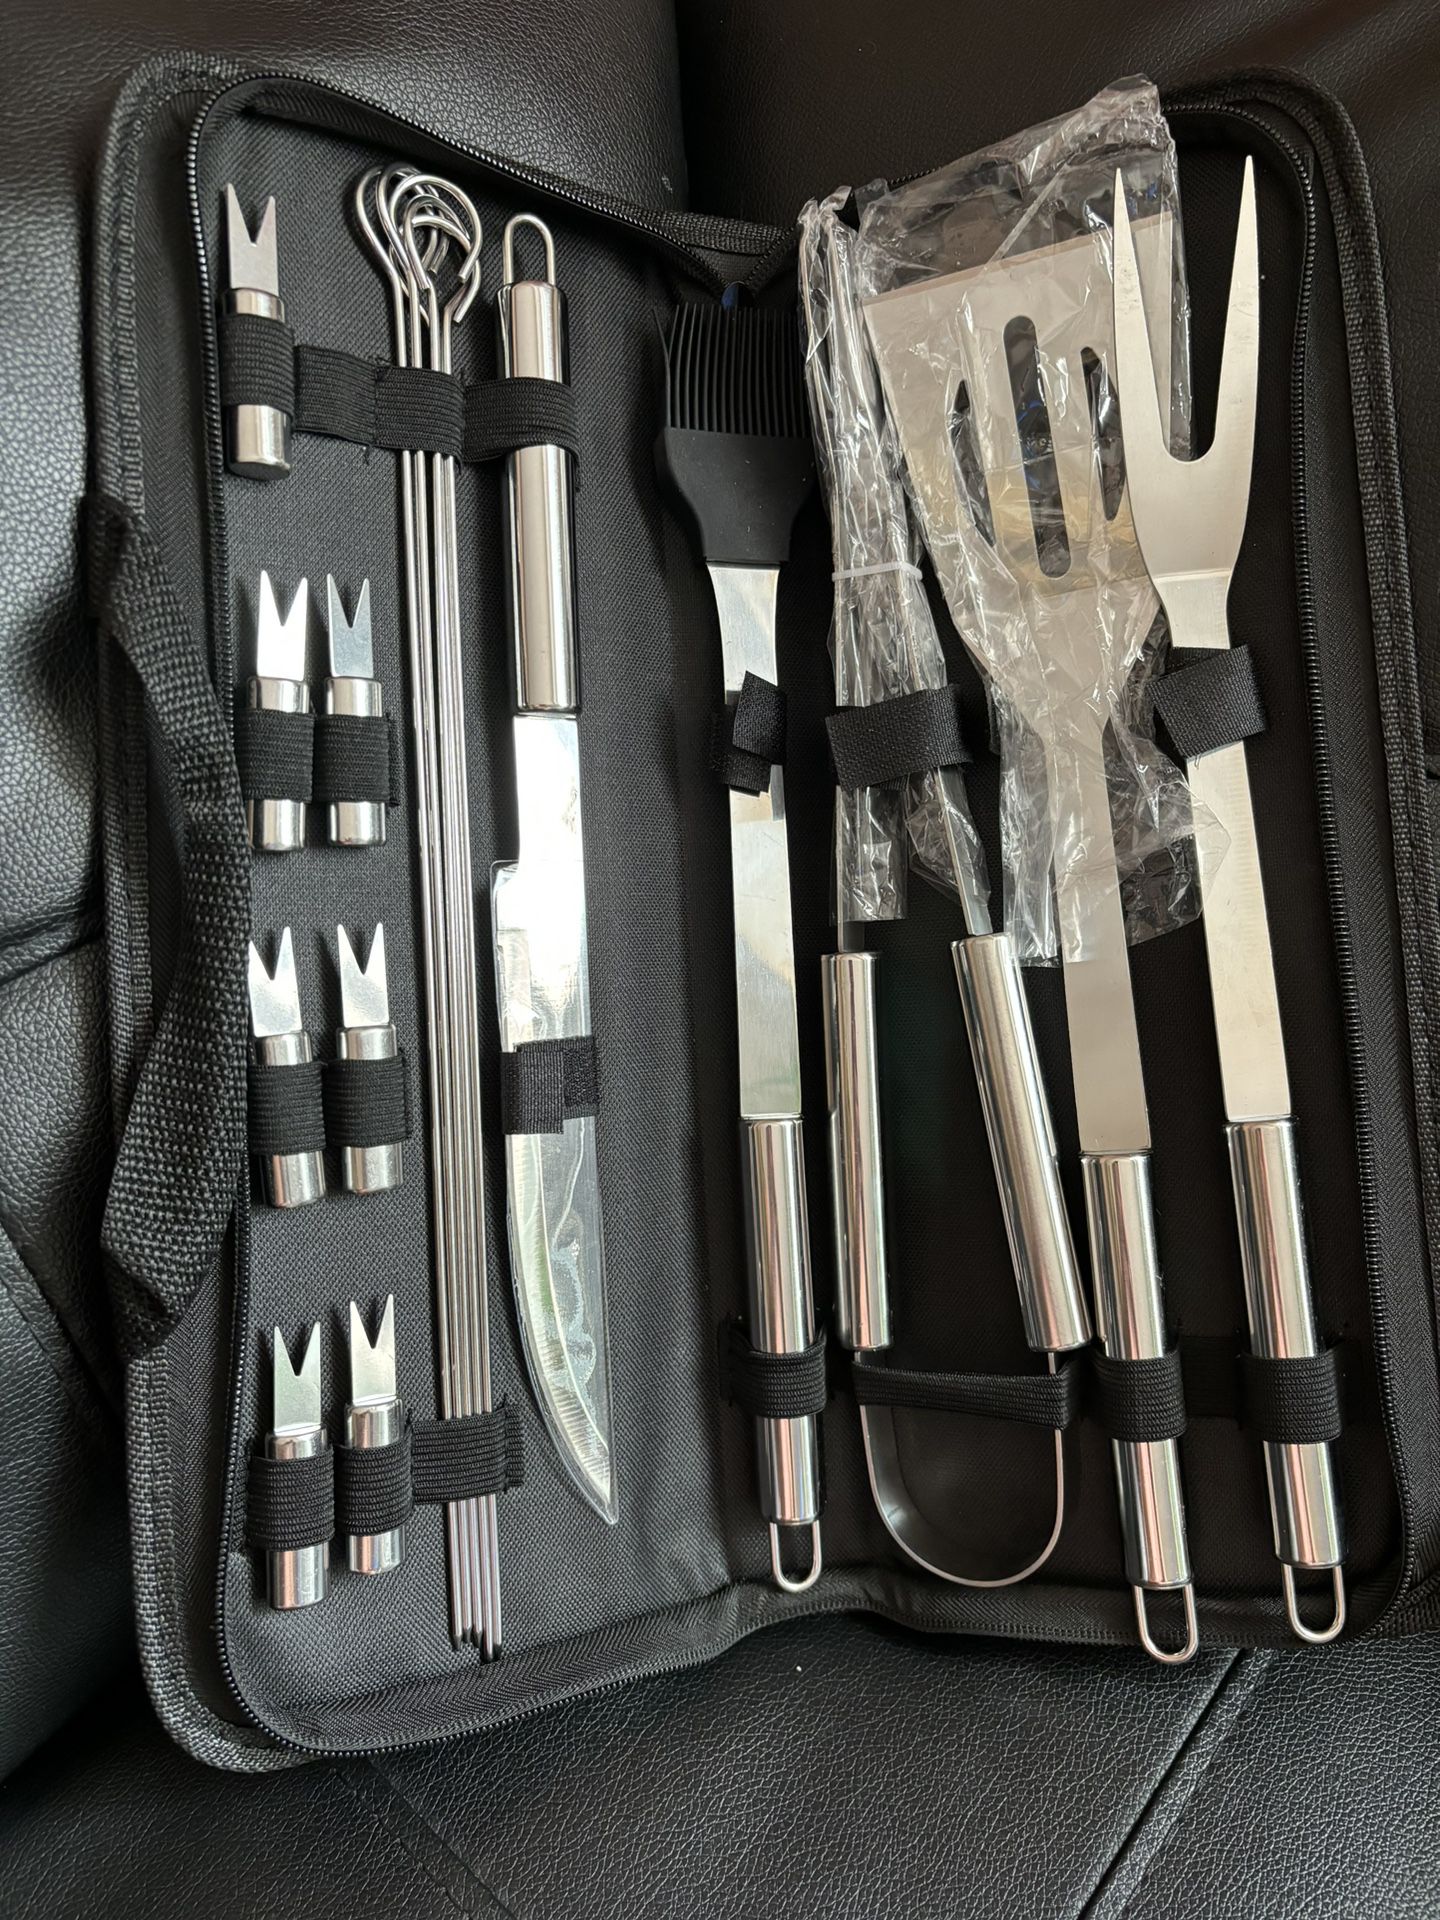 18 Pcs/set ,BBQ Grill Accessories BBQ Tool Set With Portable Case